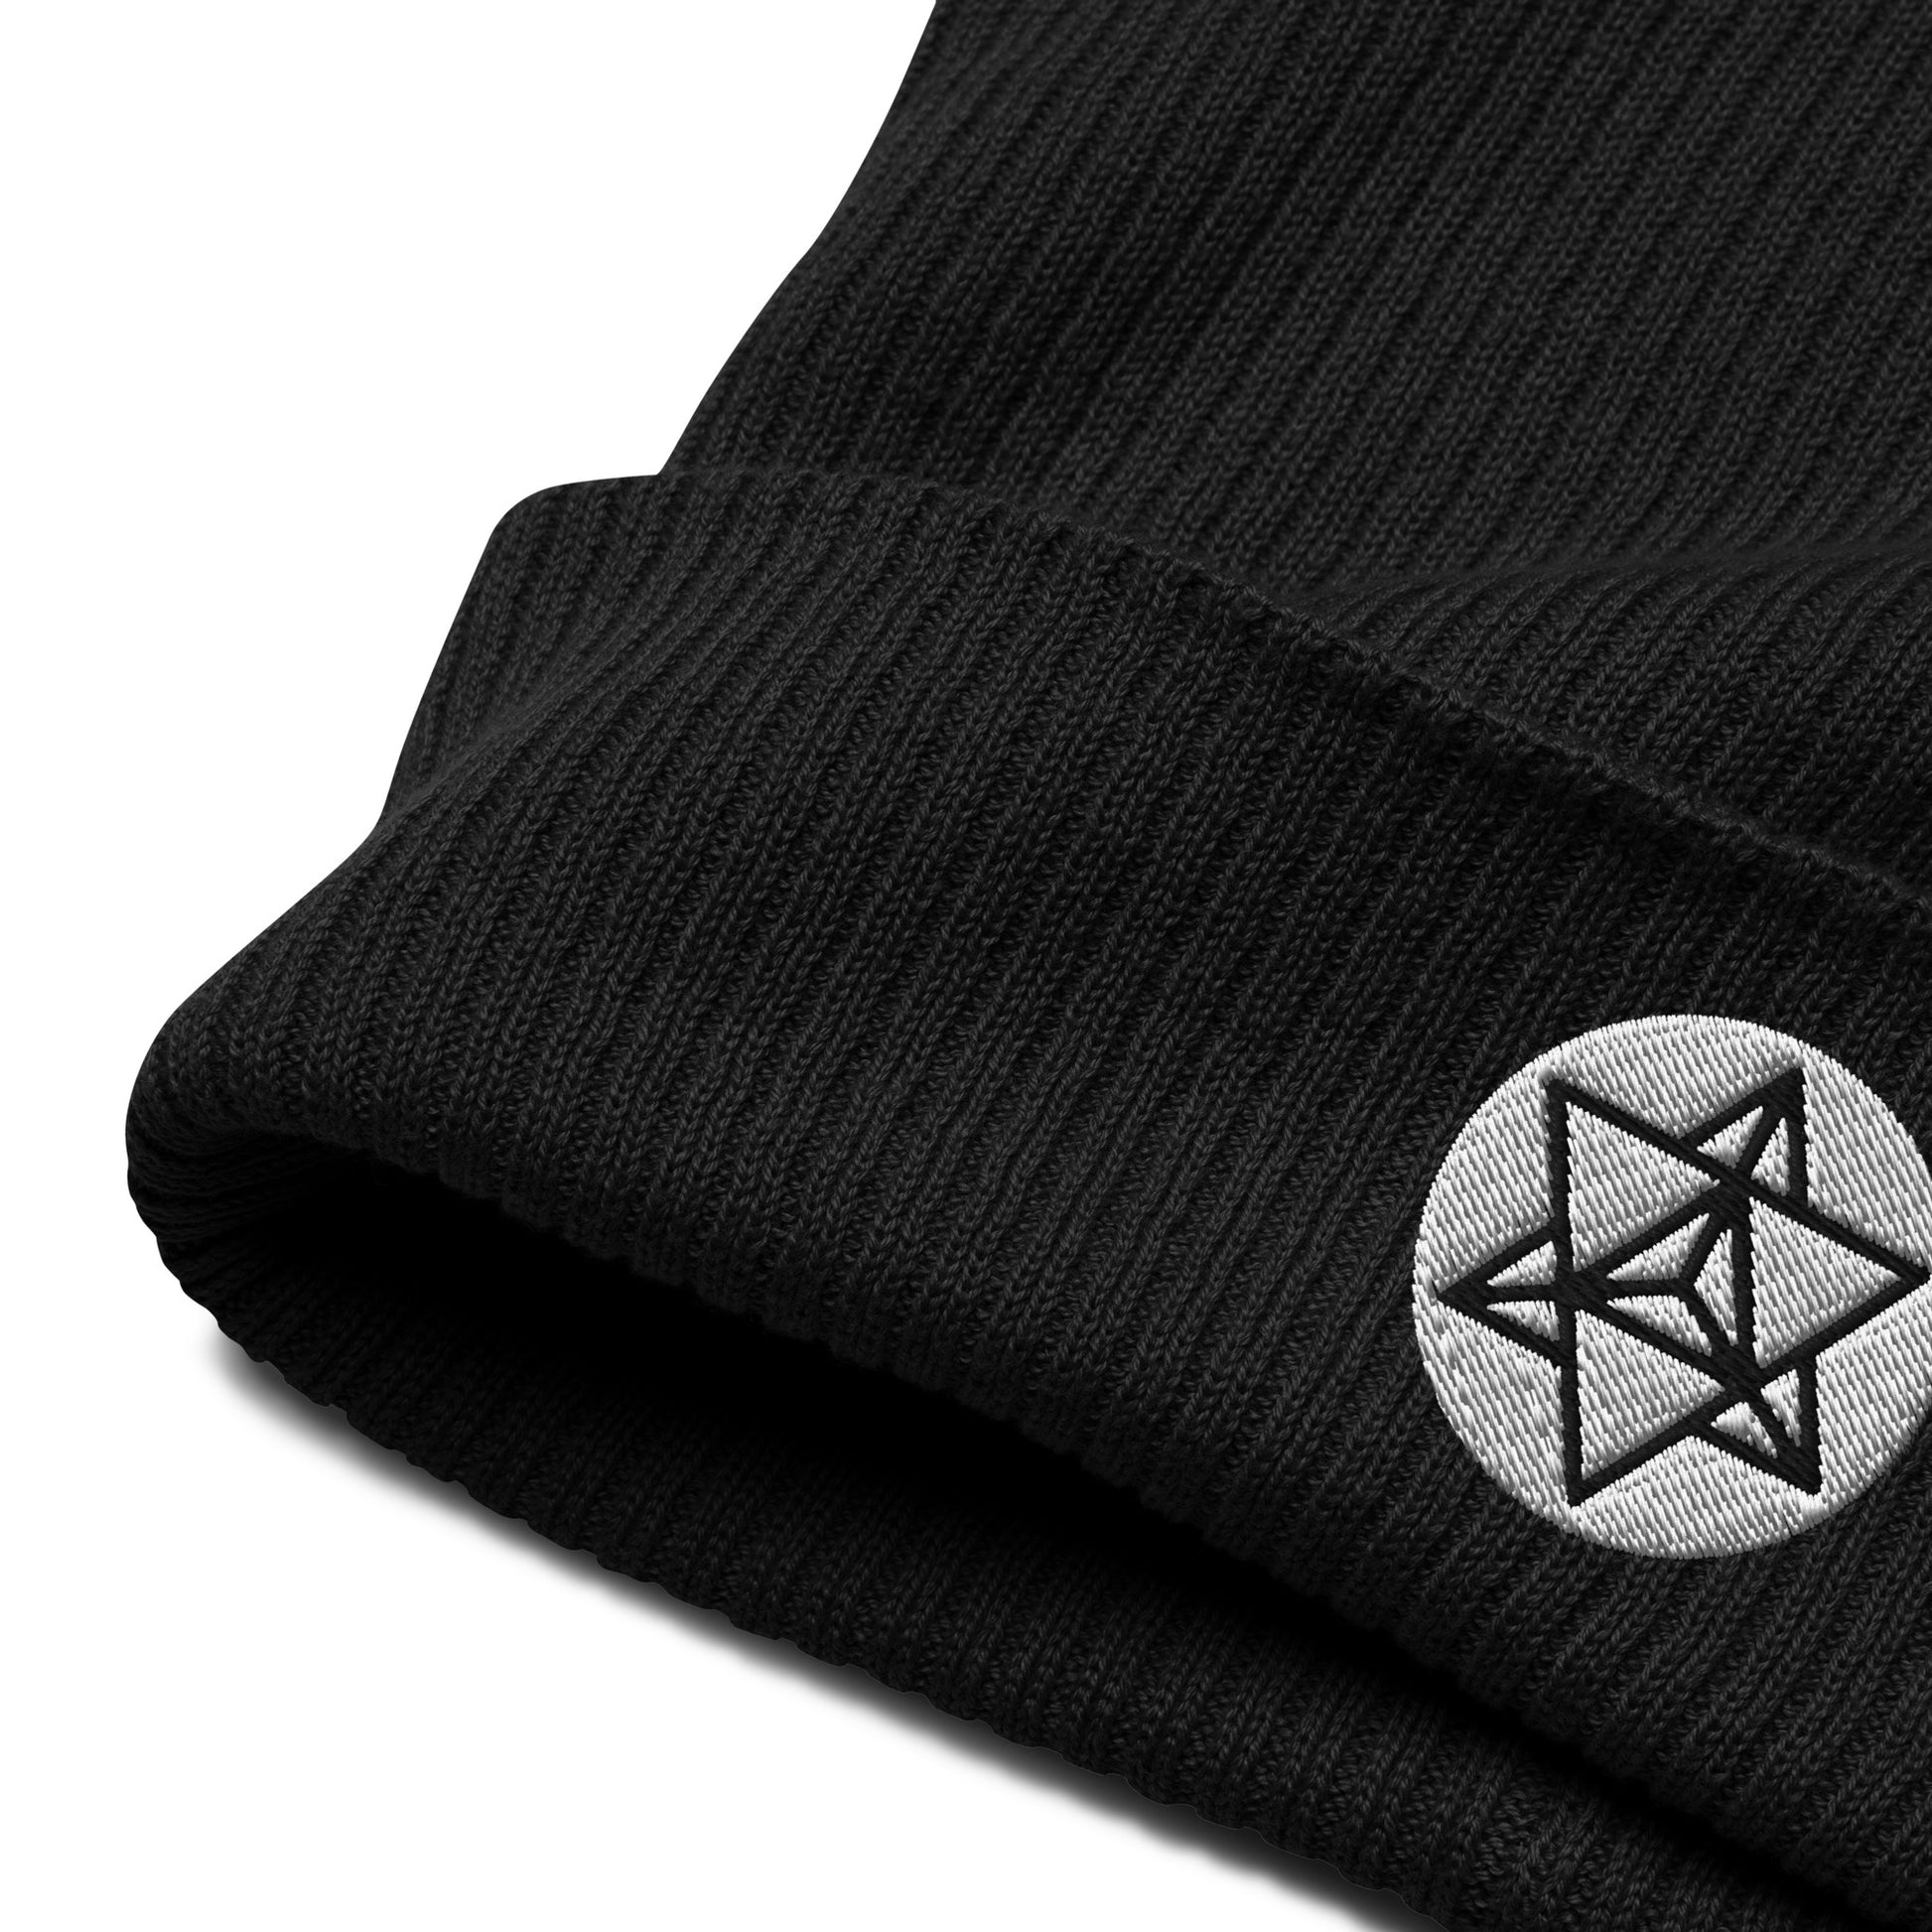 The Merkaba symbol beanie hat in Midnight Black, crafted from organic cotton and adorned with intricate embroidery. Symbolizing the journey of ascension and divine protection, the Merkaba represents profound spiritual transformation and unity of mind, body, and spirit. 